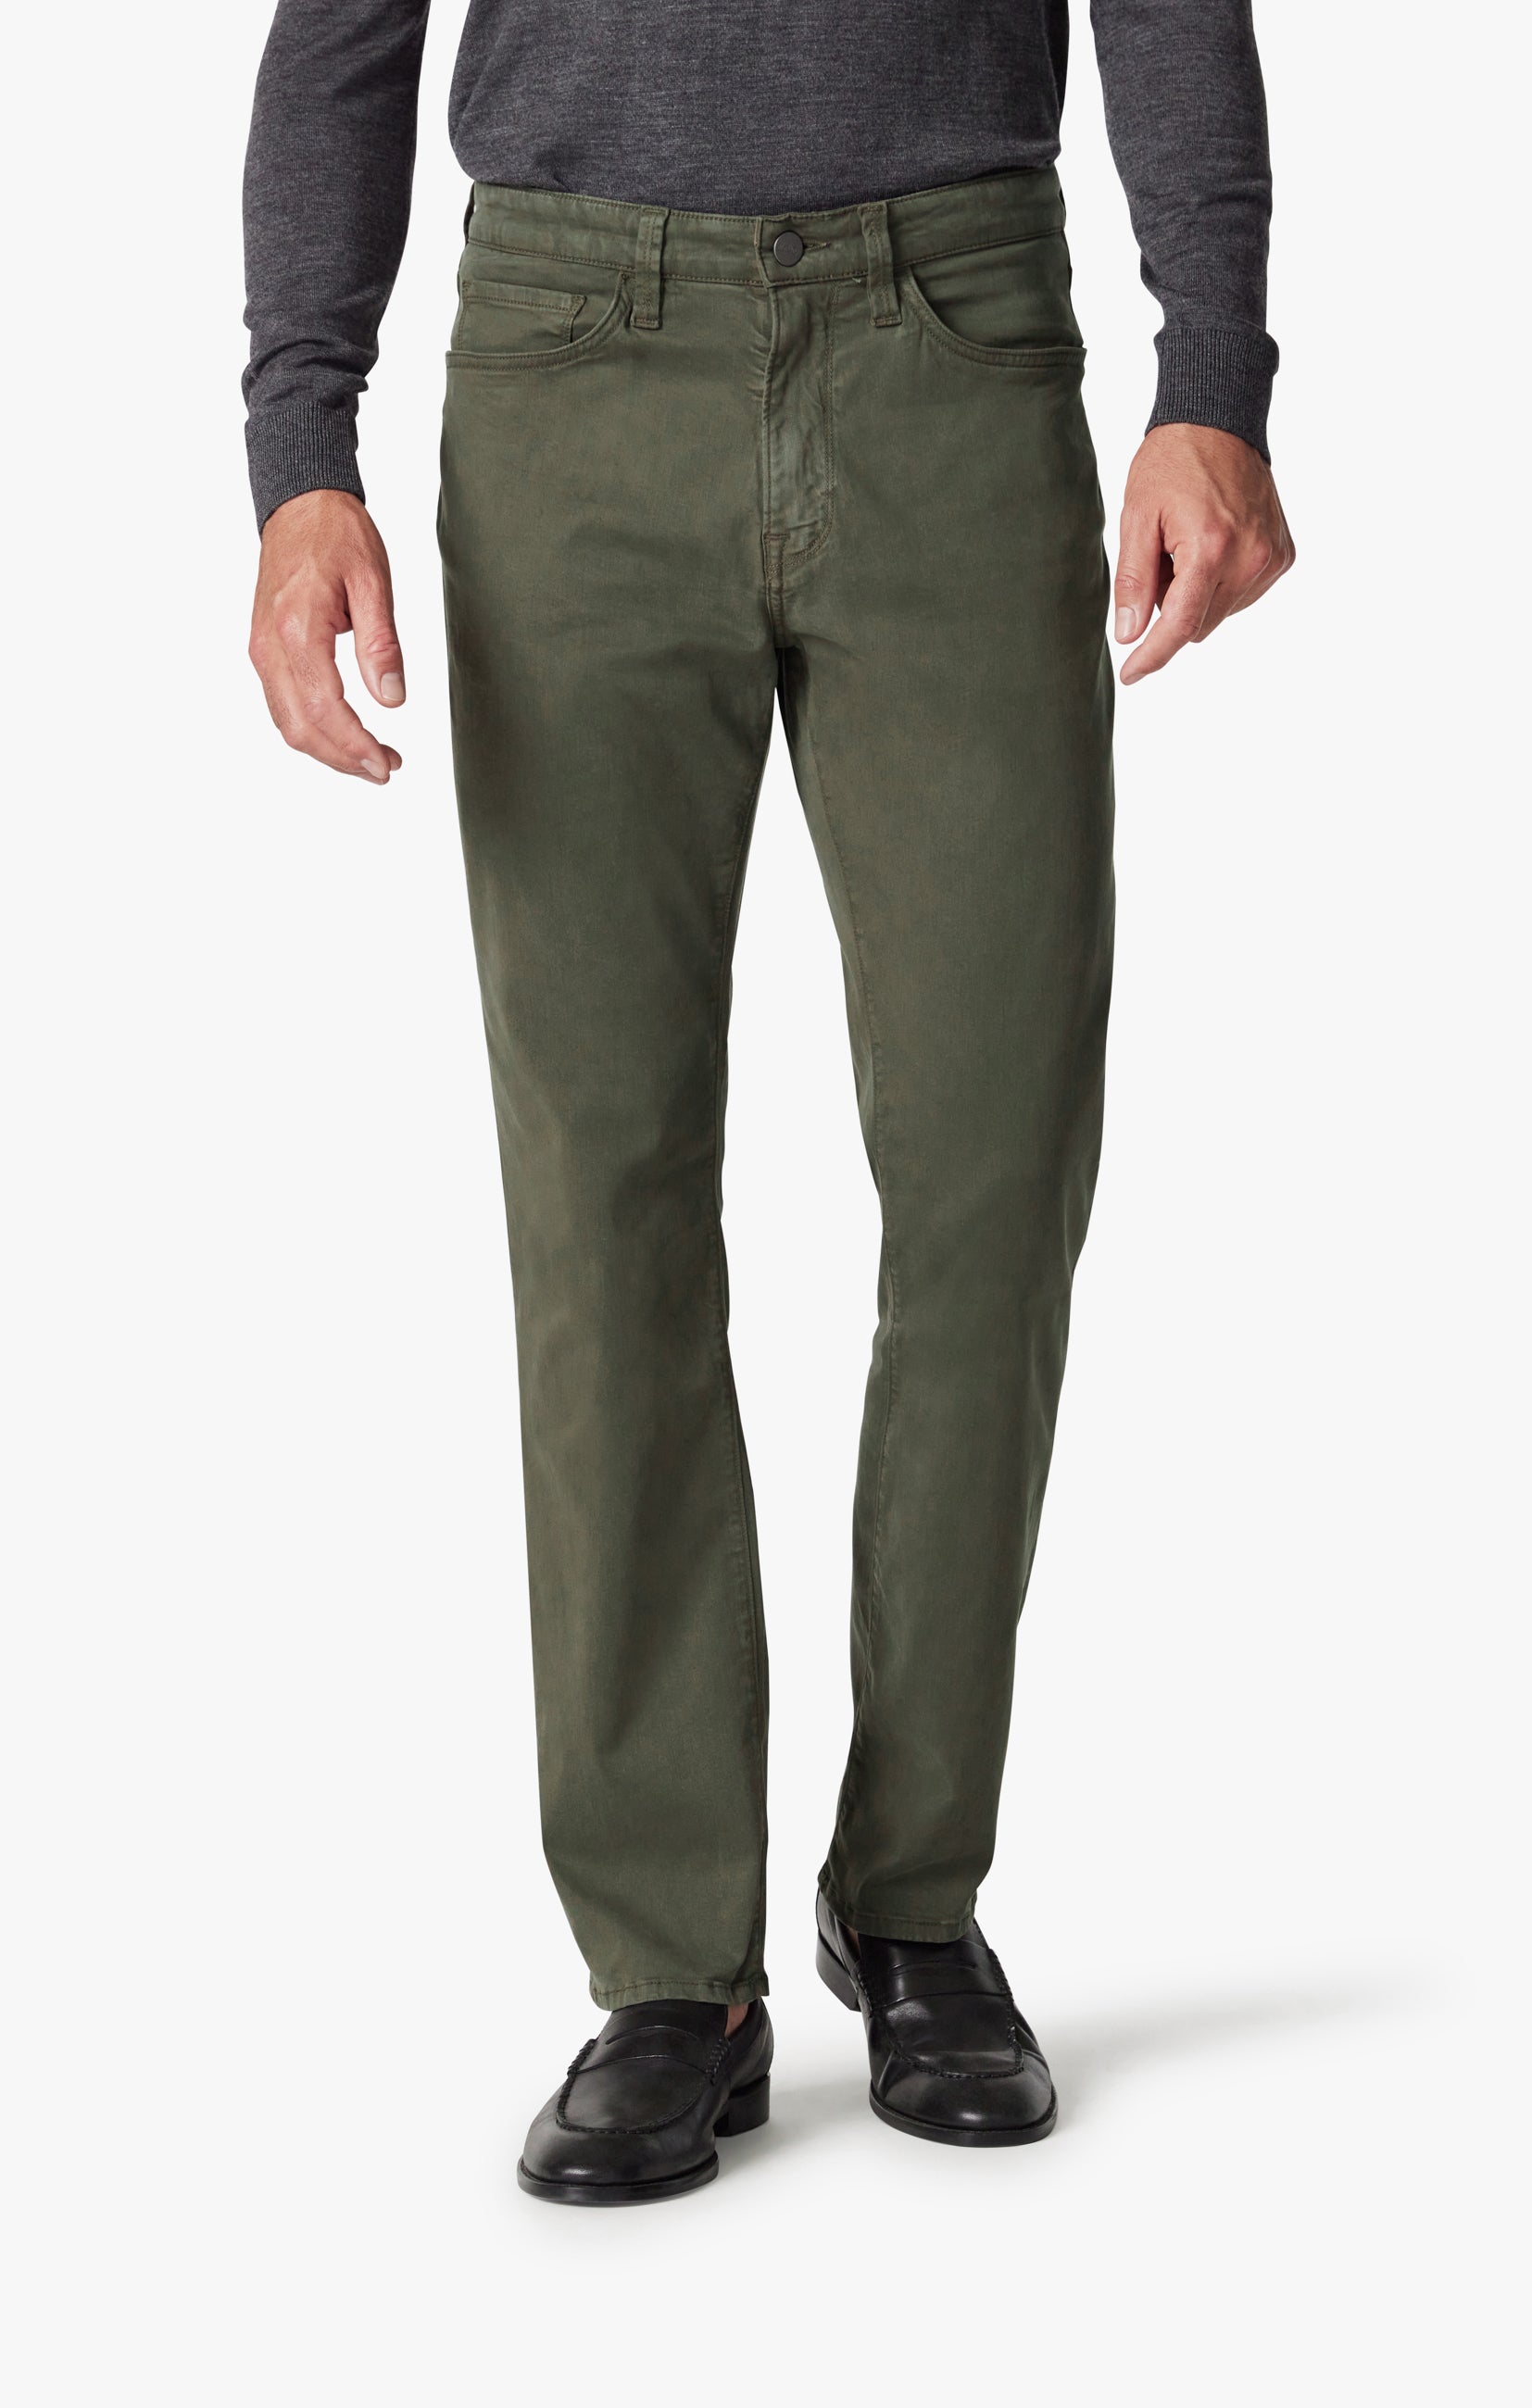 Charisma Relaxed Straight Leg Pants In Olive Twill Image 4